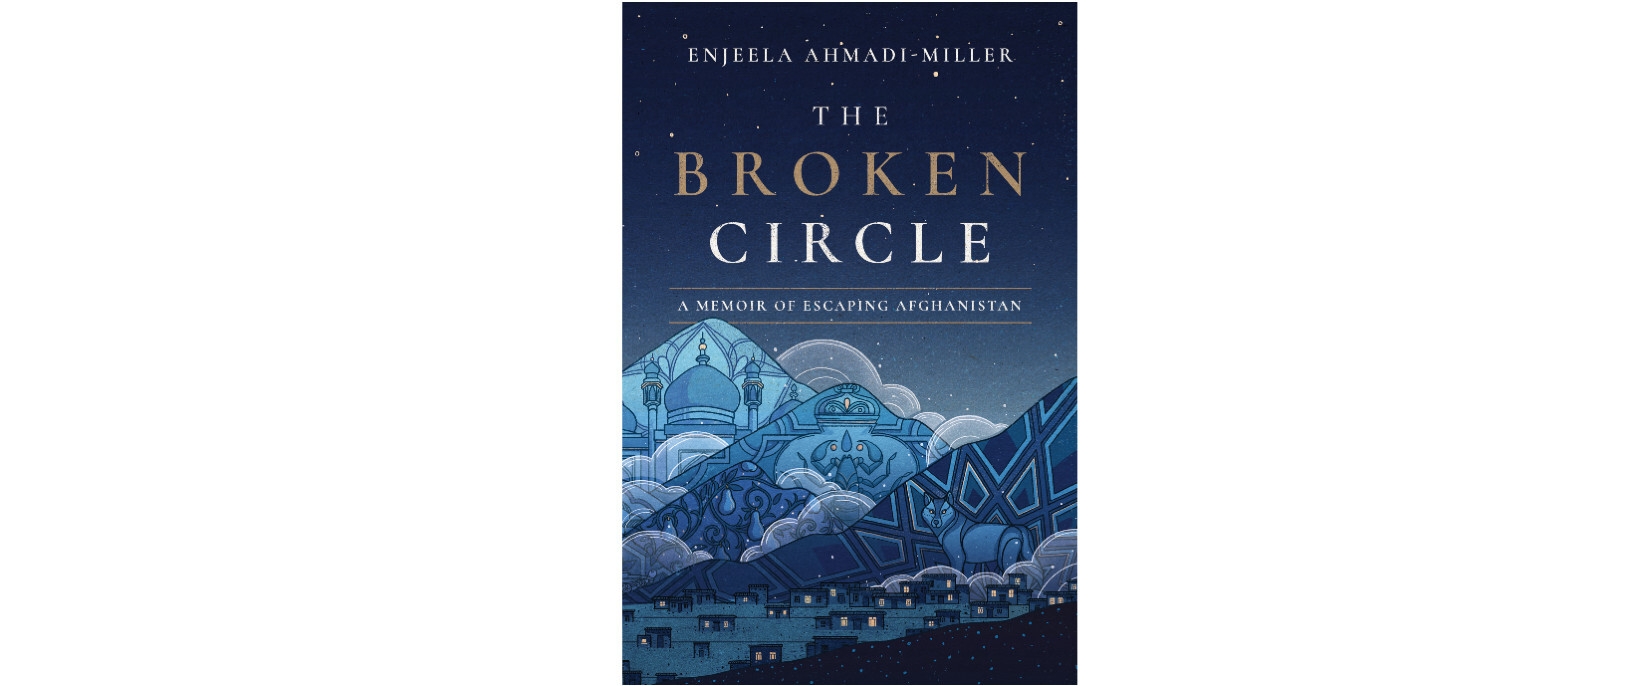 The book cover of "The Broken Circle" consists of shades of blue mountains in a night sky. Within one mountain appears a palace, in another mountain appears a scorpion and in the third mountain are line patterns with a wolf. A town sits at the base of the mountains.